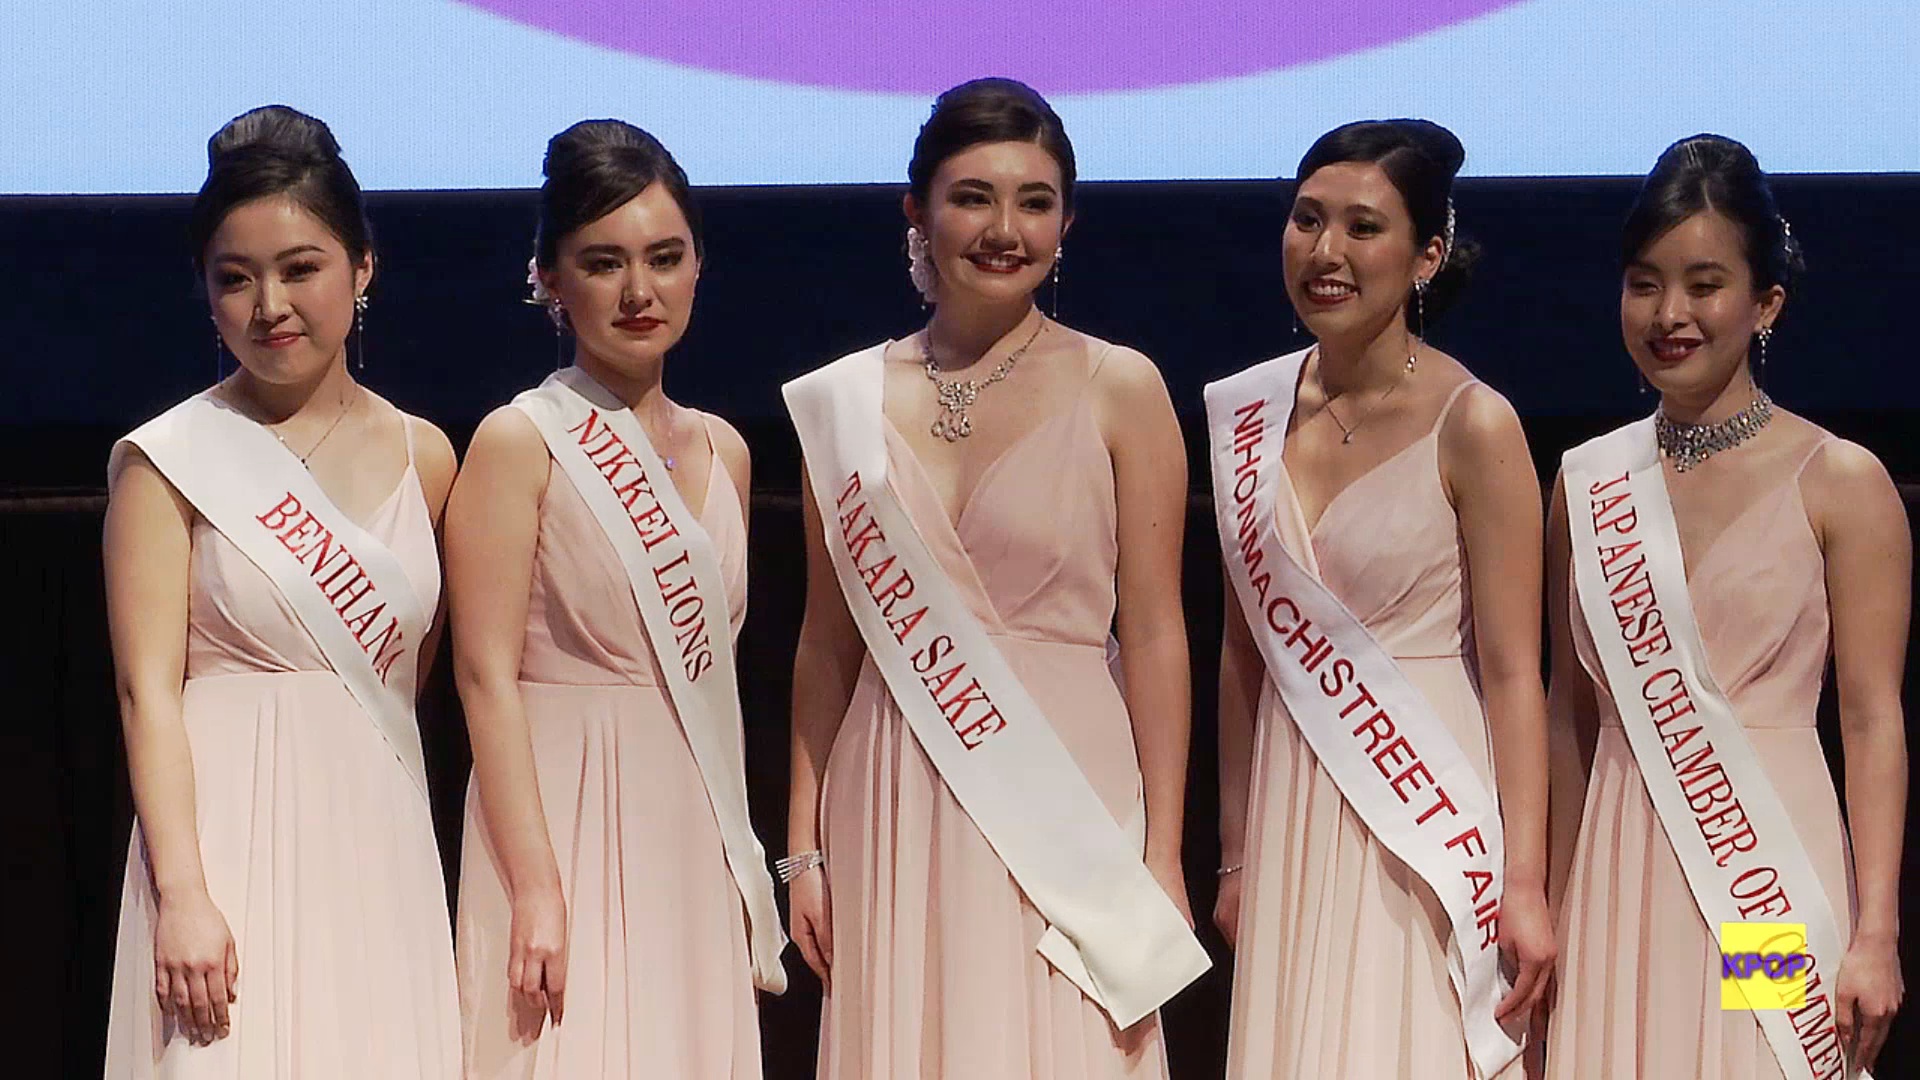 Who Became Queen at the 2019 Northern California Cherry Blossom Pageant